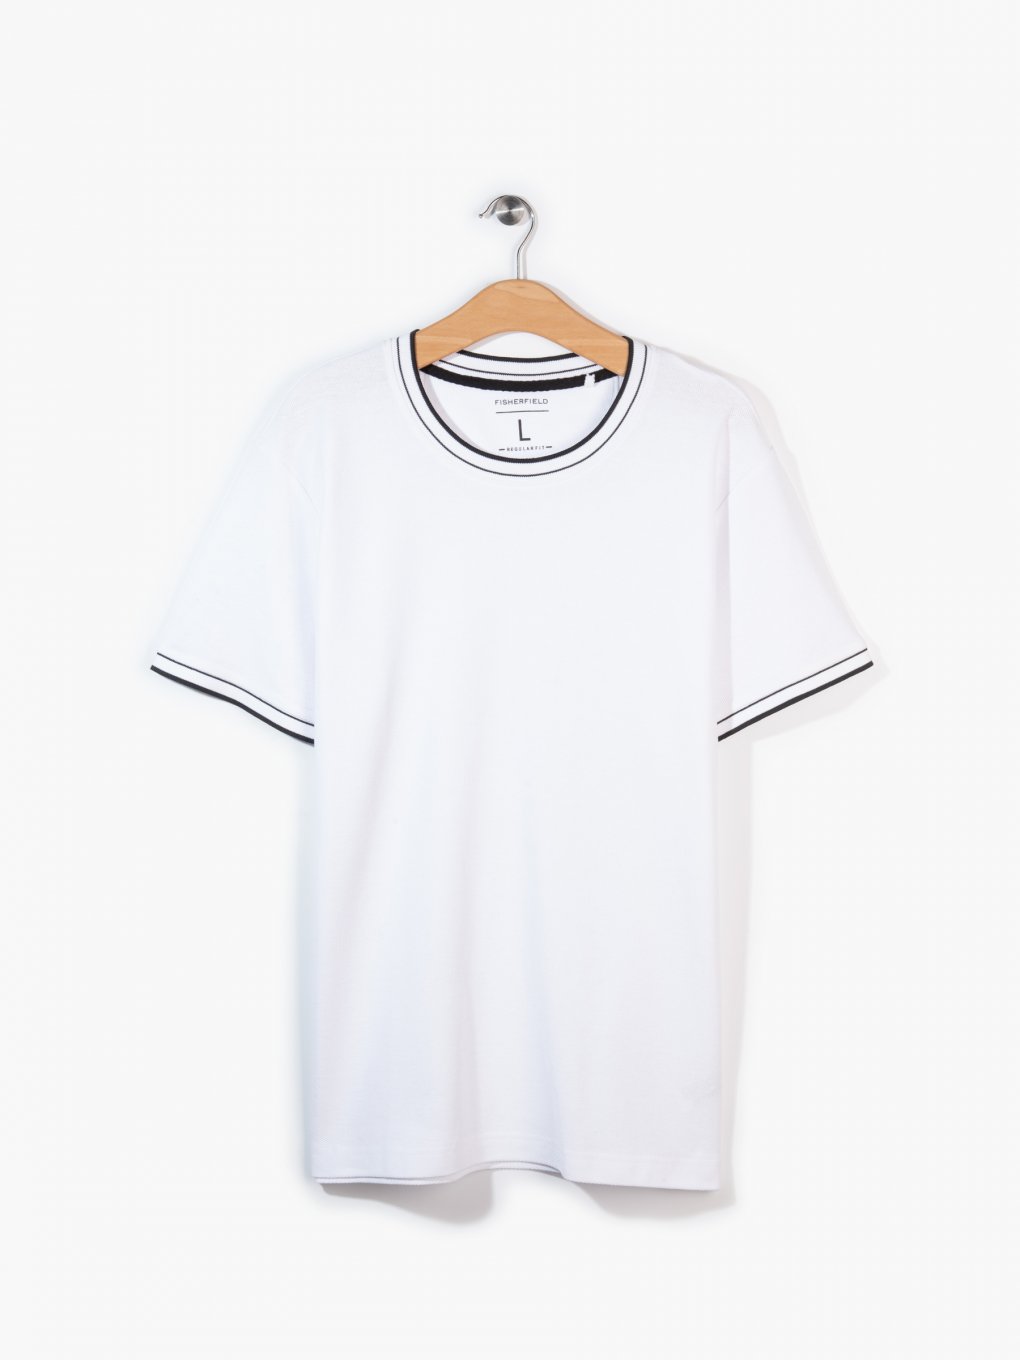 Cotton pique short sleeve t-shirt with striped trims